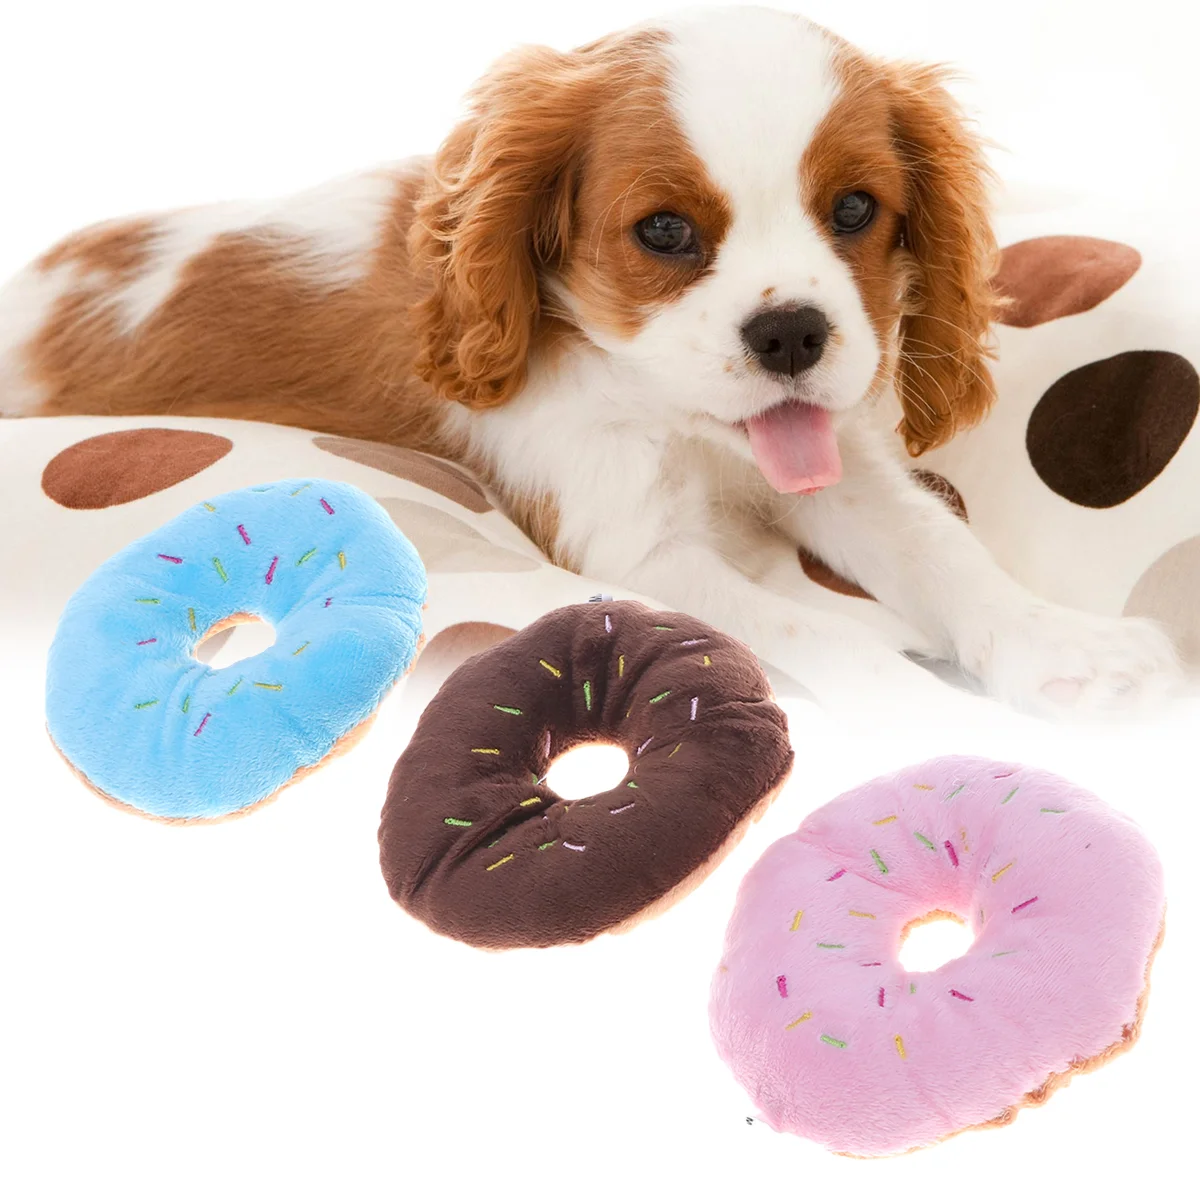 

Toy Dog Toys Chew Puppy Pet Interactive Chewing Donut Teething Plush Training Squeaky Teeth Squeaker Catnip Cleaning Cat Dogs